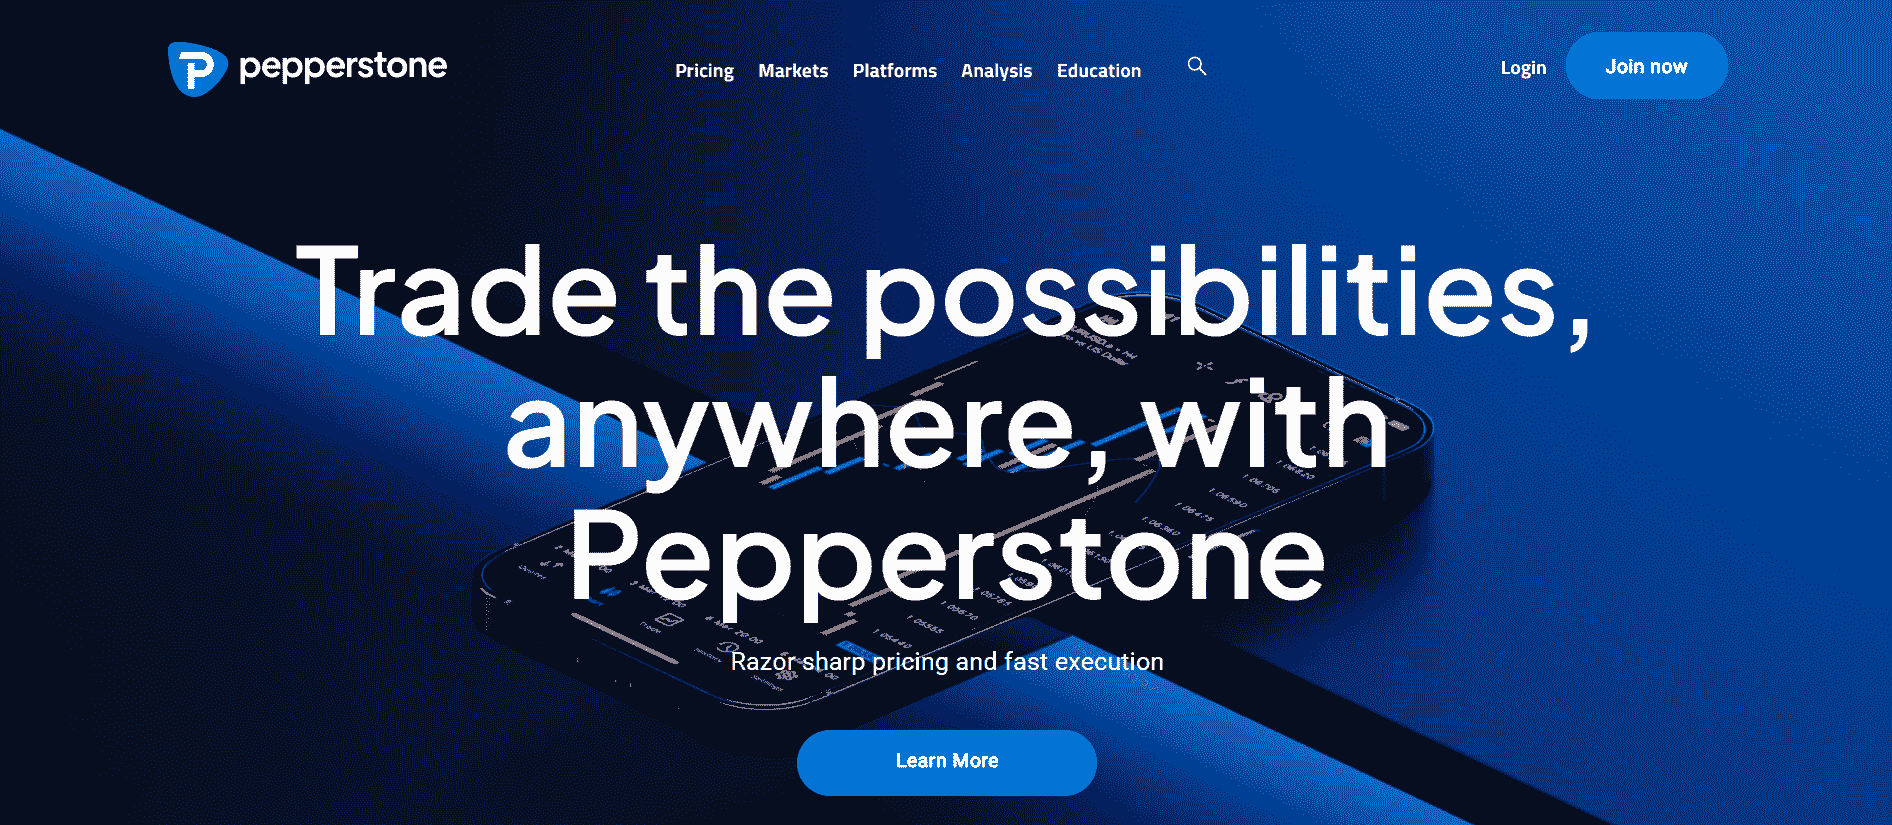 PepperstoneHomepage.png